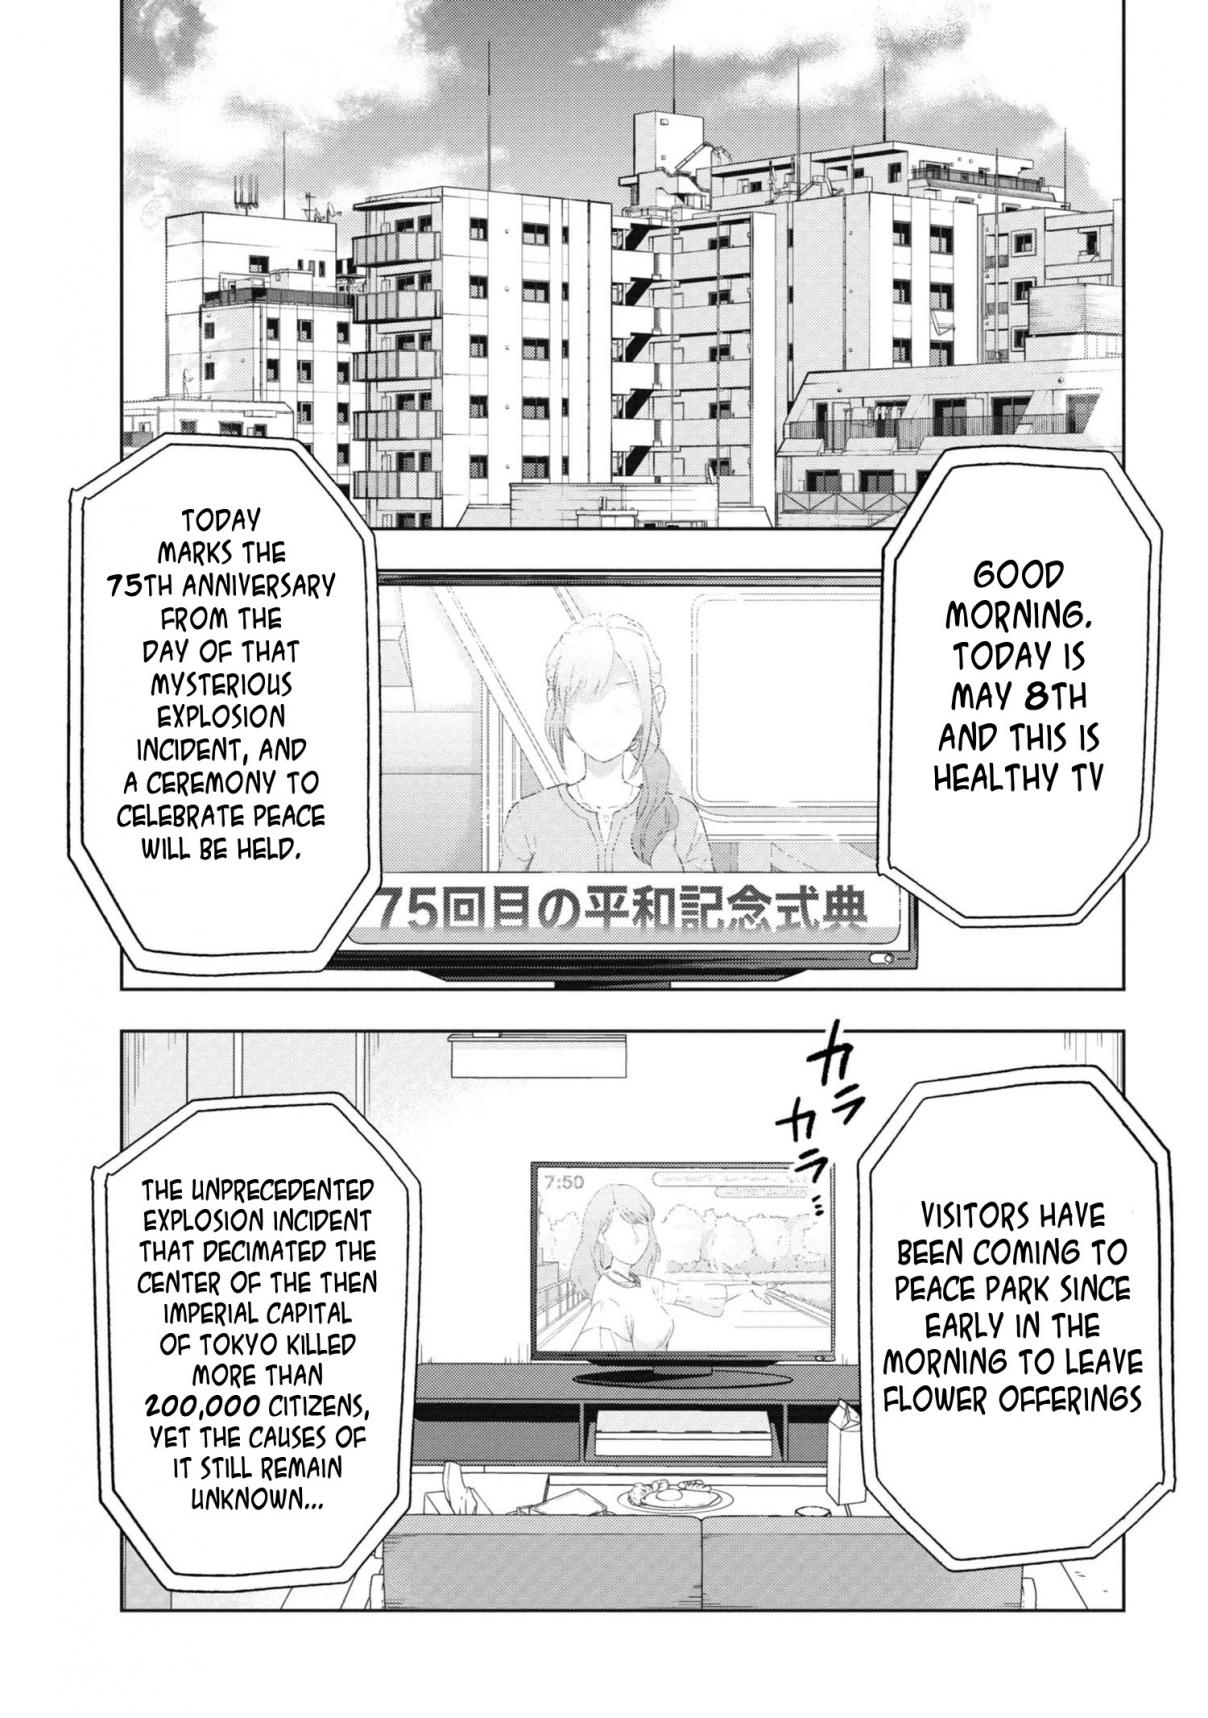 Fate/Type Redline Vol. 1 Ch. 1 Chapter 01